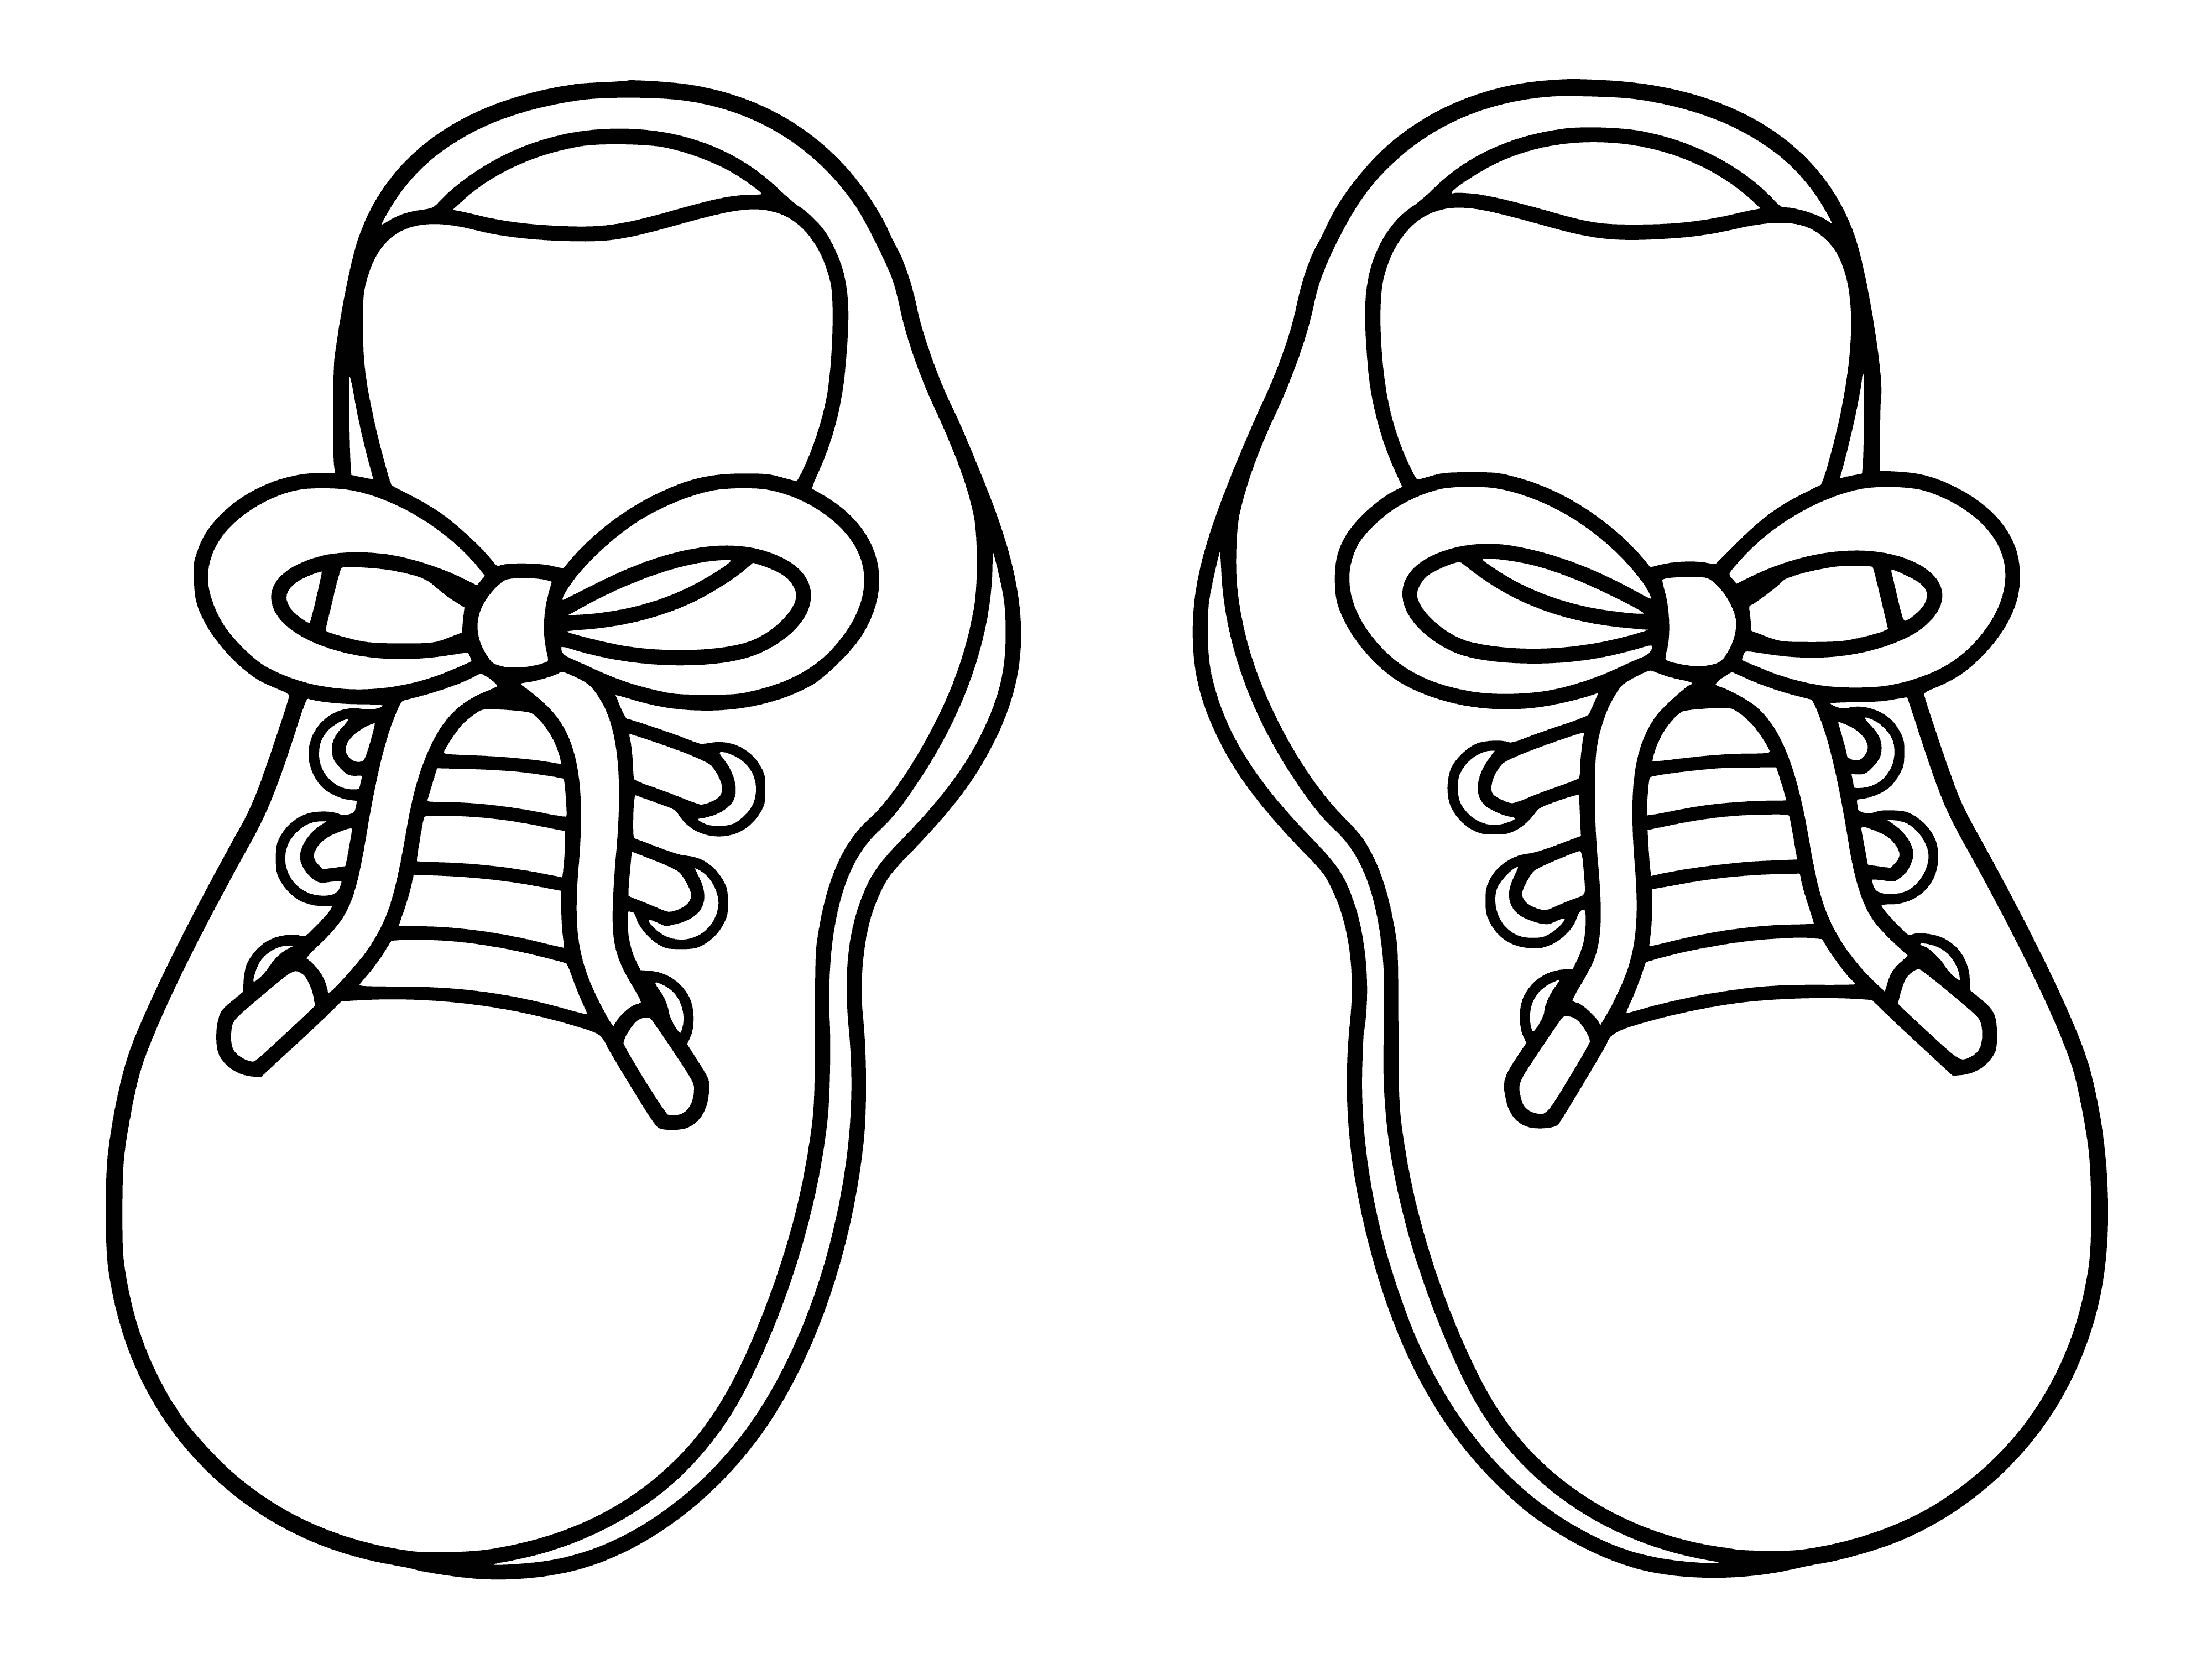 coloring page: Boots are a type of footwear that cover foot and lower leg, commonly made of leather or rubber, closed with laces or zipper. Often worn for work, cold weather, or riding.